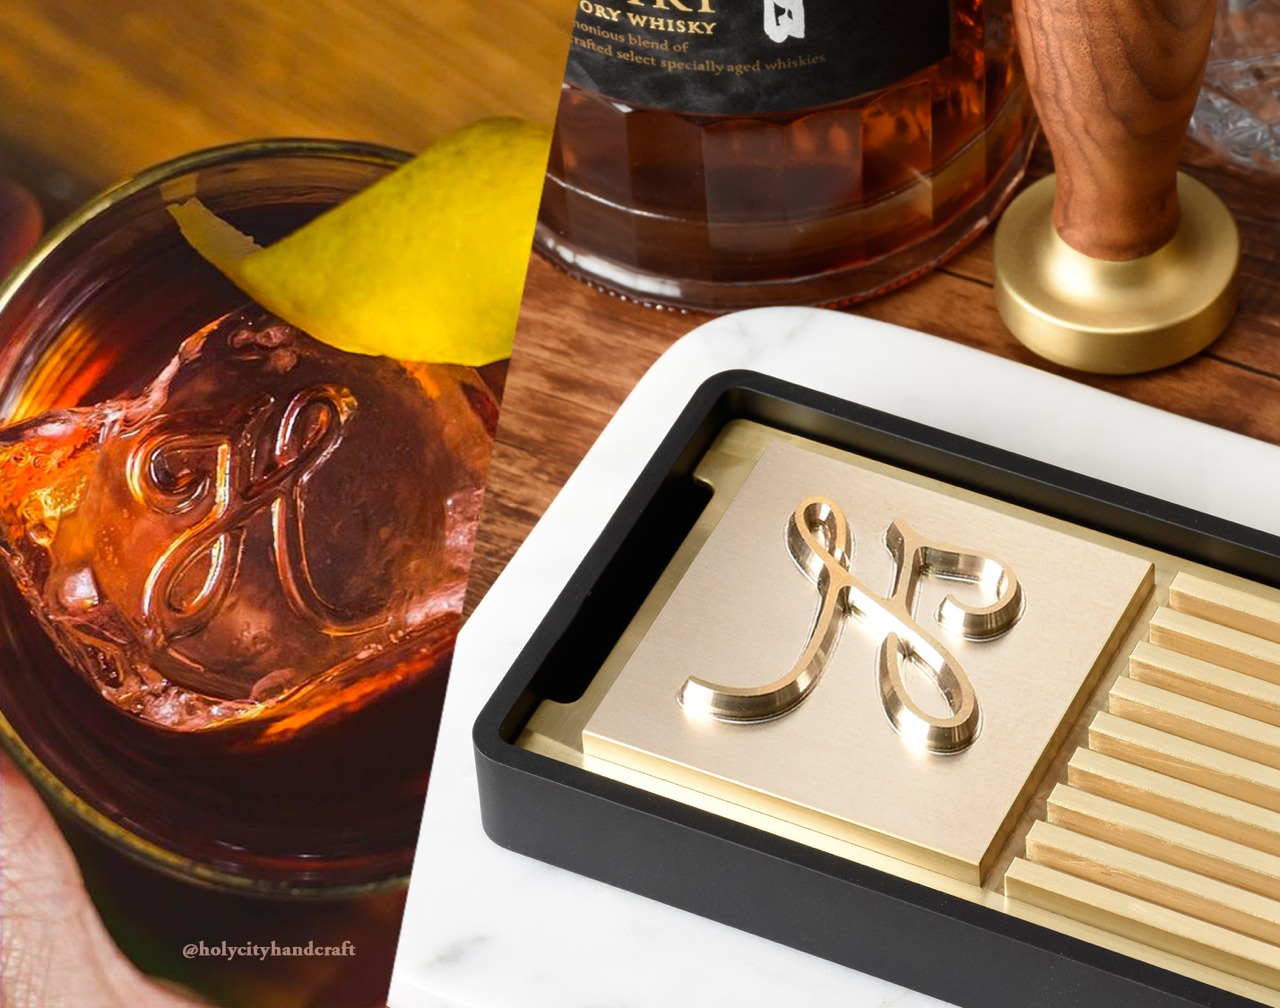 This 'ice embosser' lets you completely upgrade your cocktail game